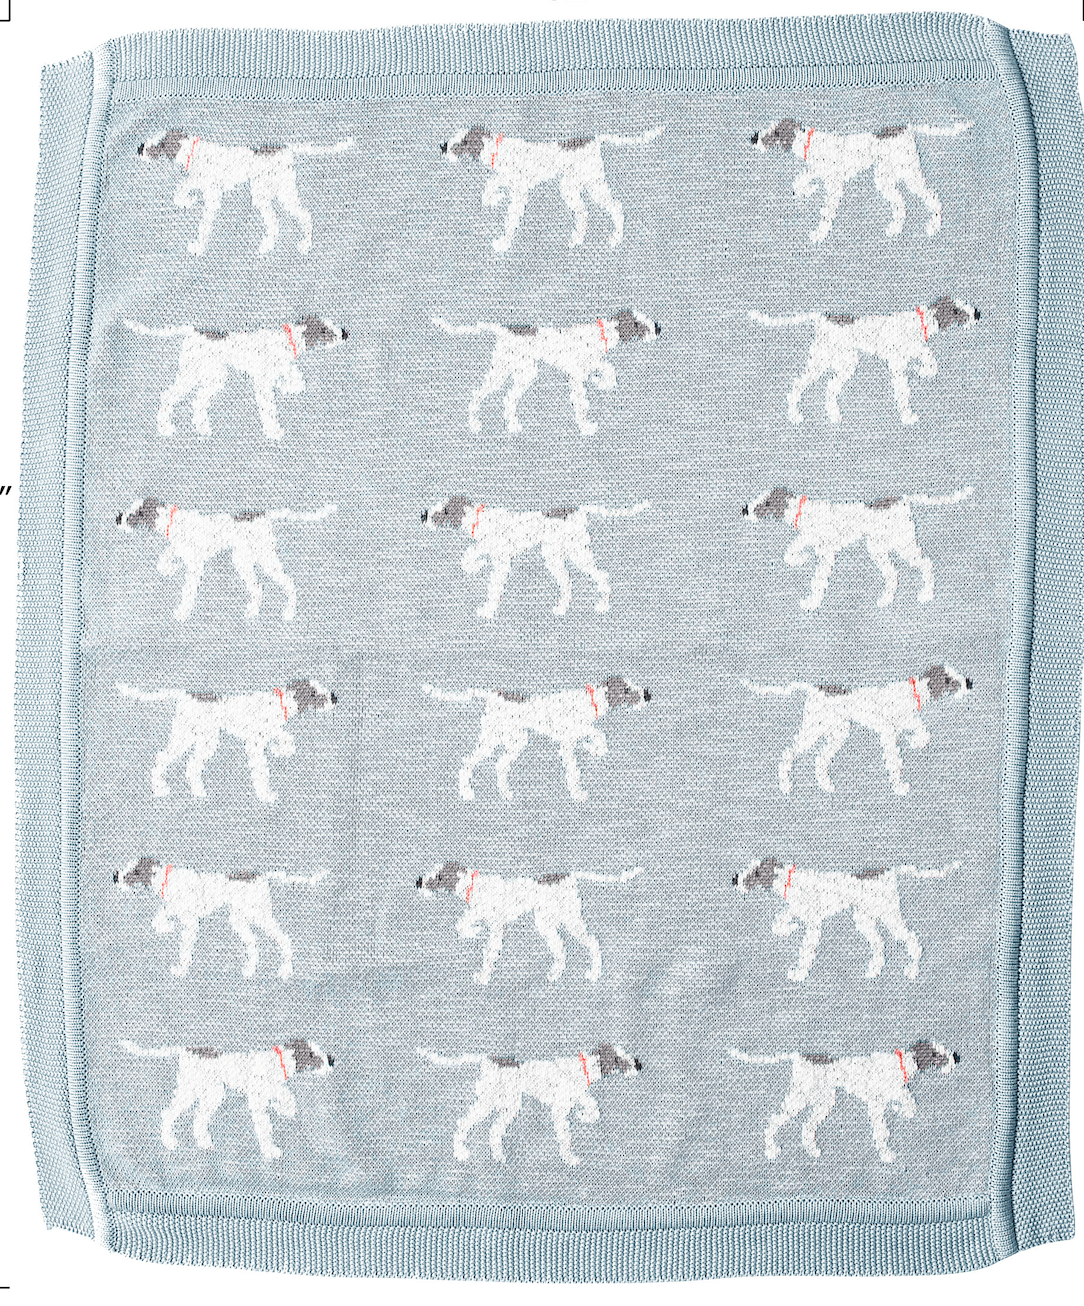 Cotton Knit Baby Blanket w/ Dogs